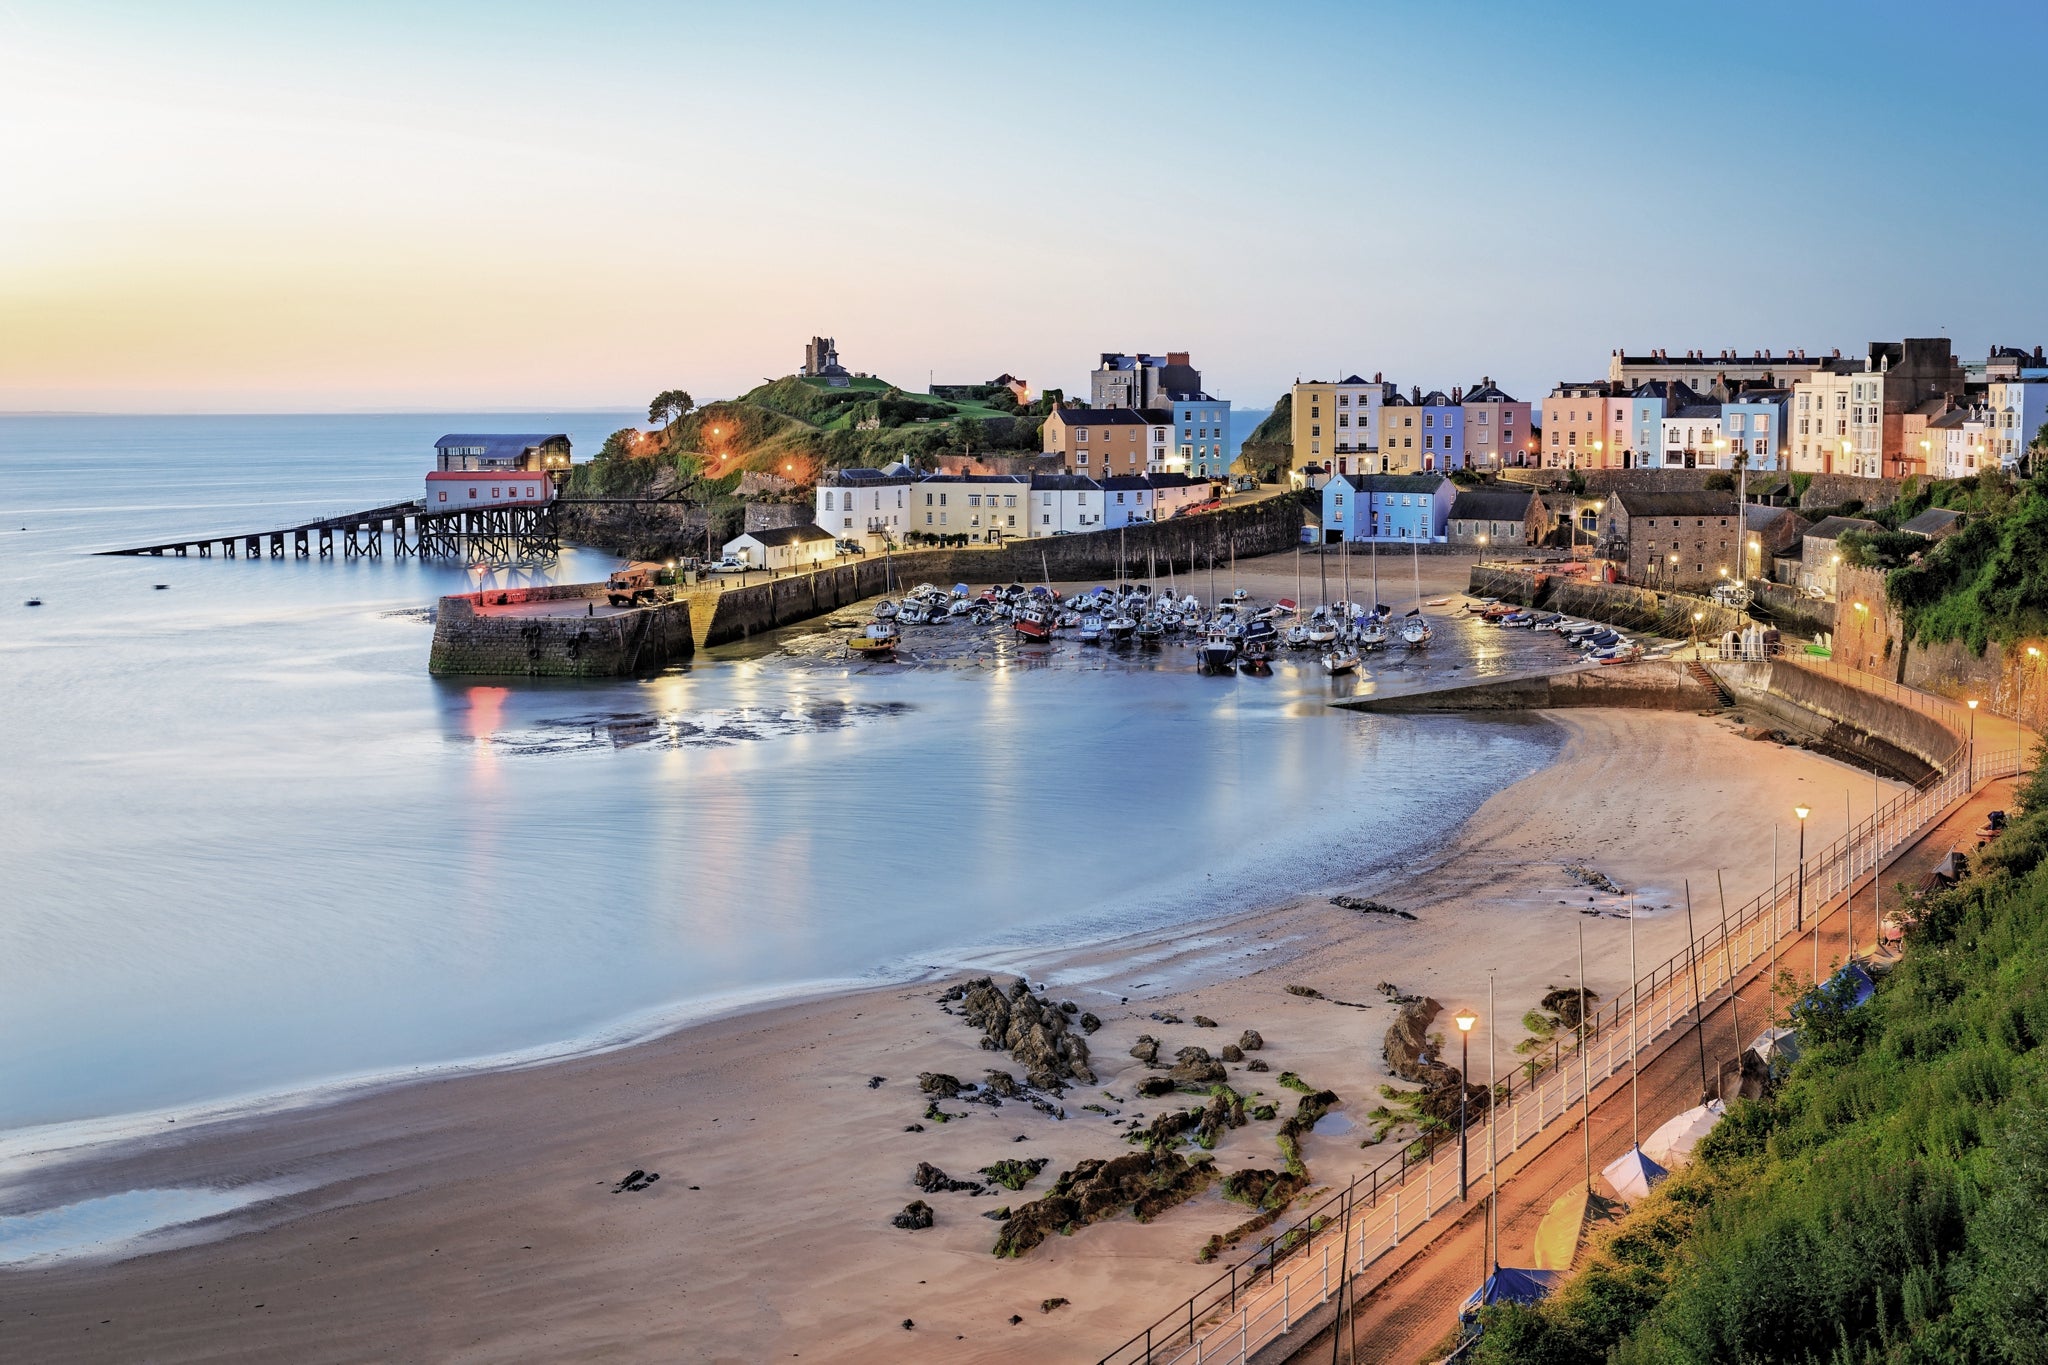 The Undiscovered Tenby